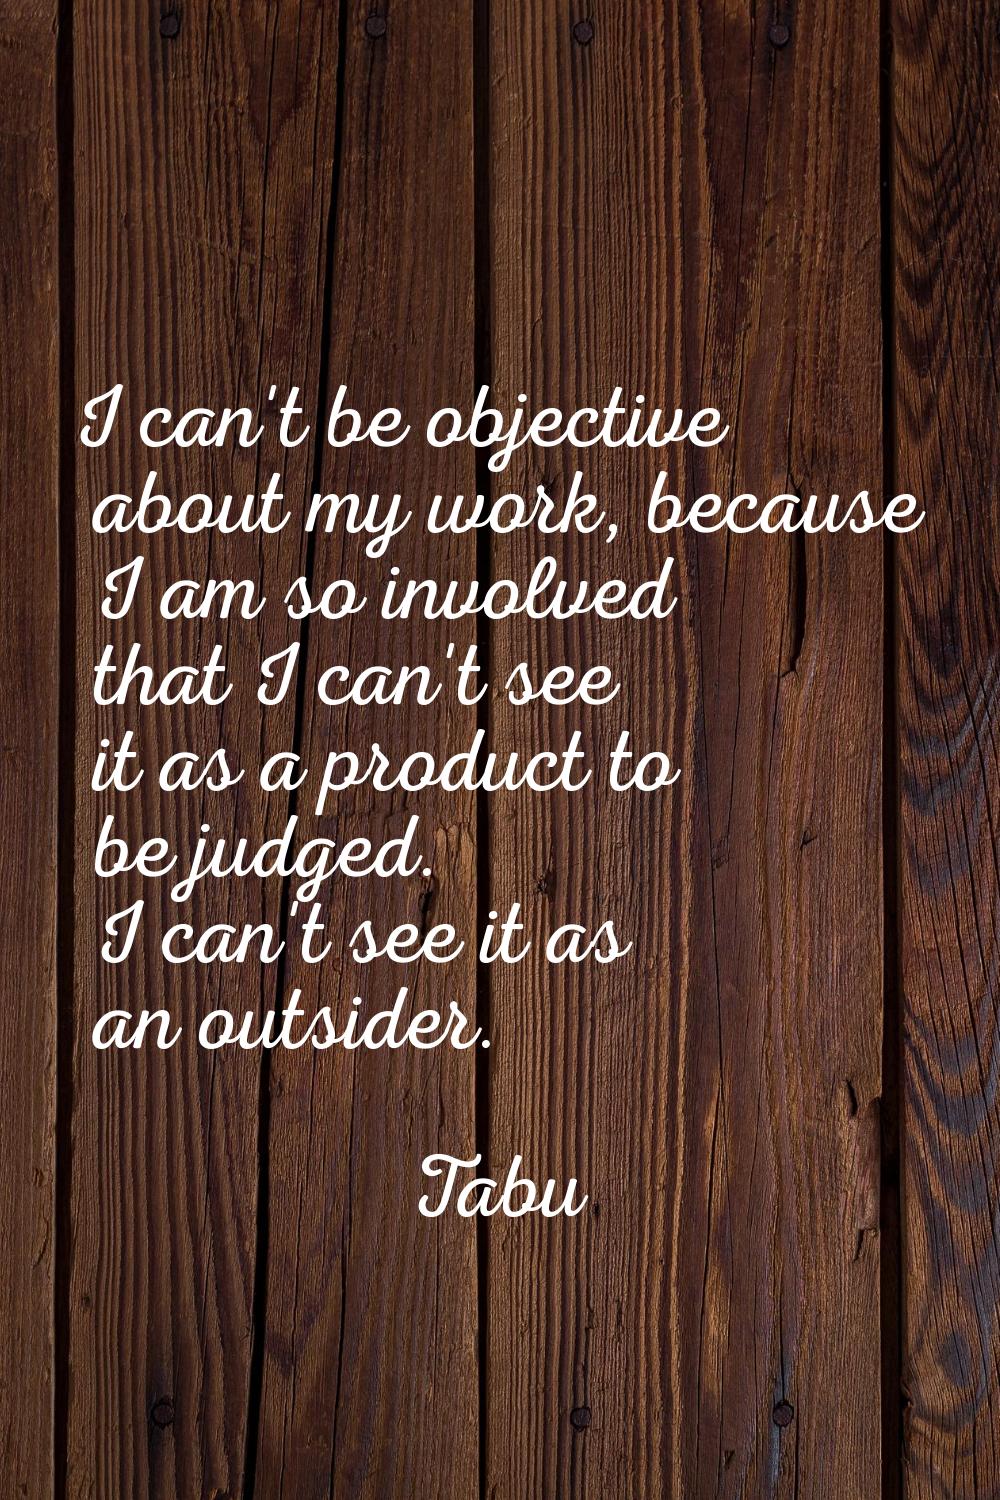 I can't be objective about my work, because I am so involved that I can't see it as a product to be